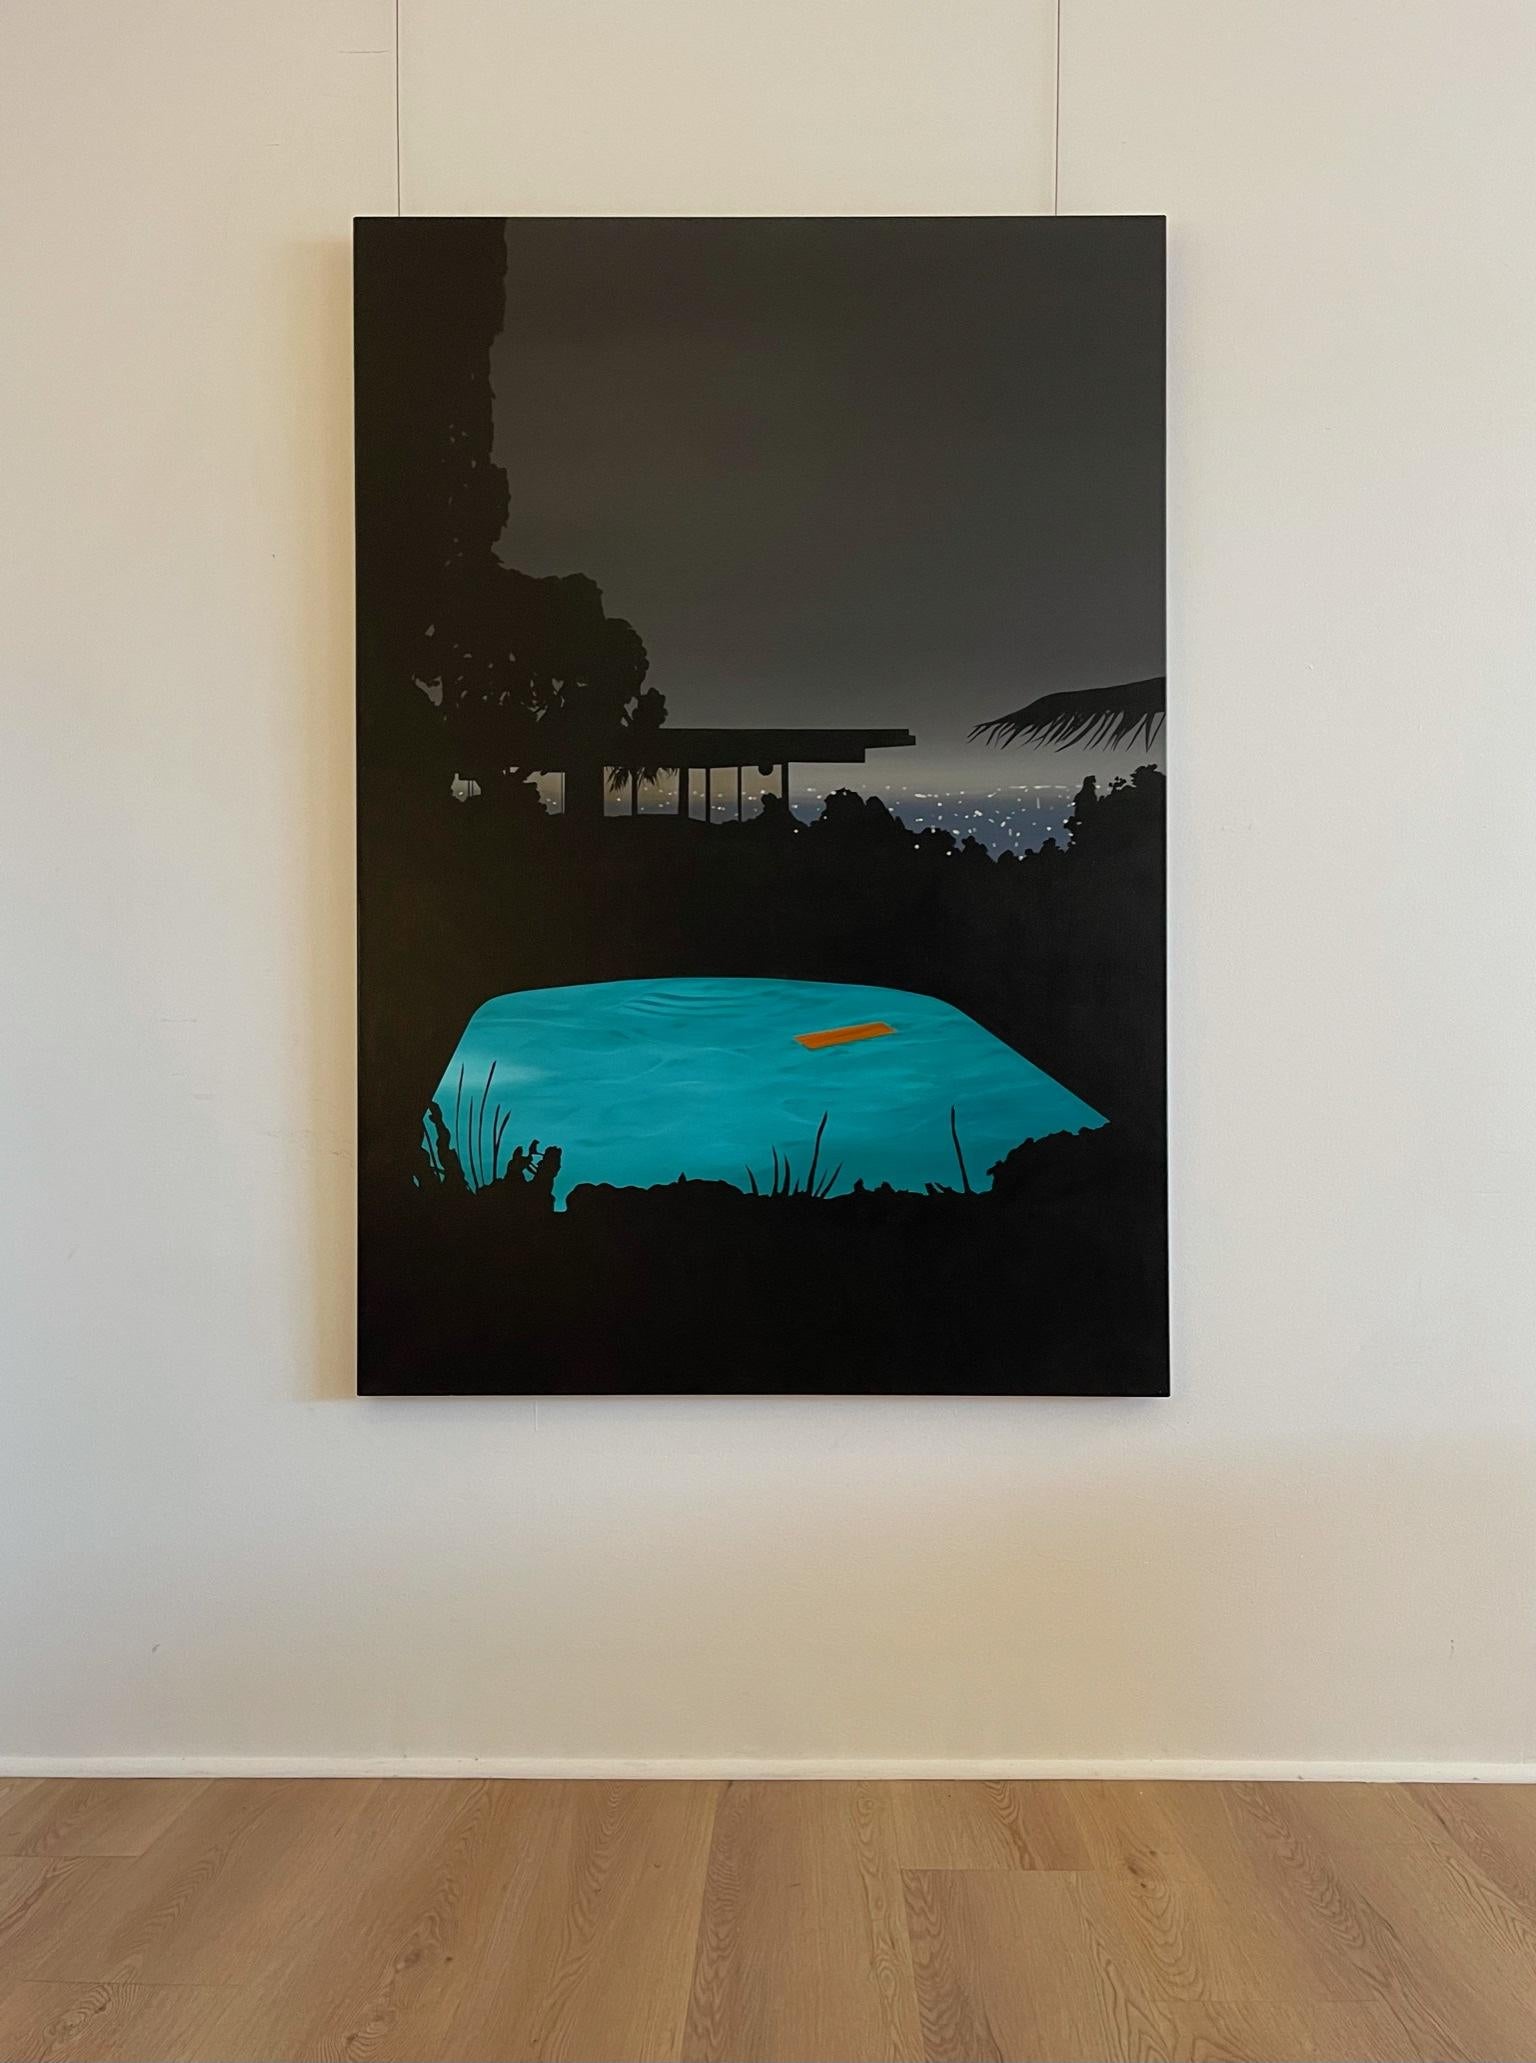 Pool with Orange Float (Stahl Silhouette) - Painting by Laurence Jones